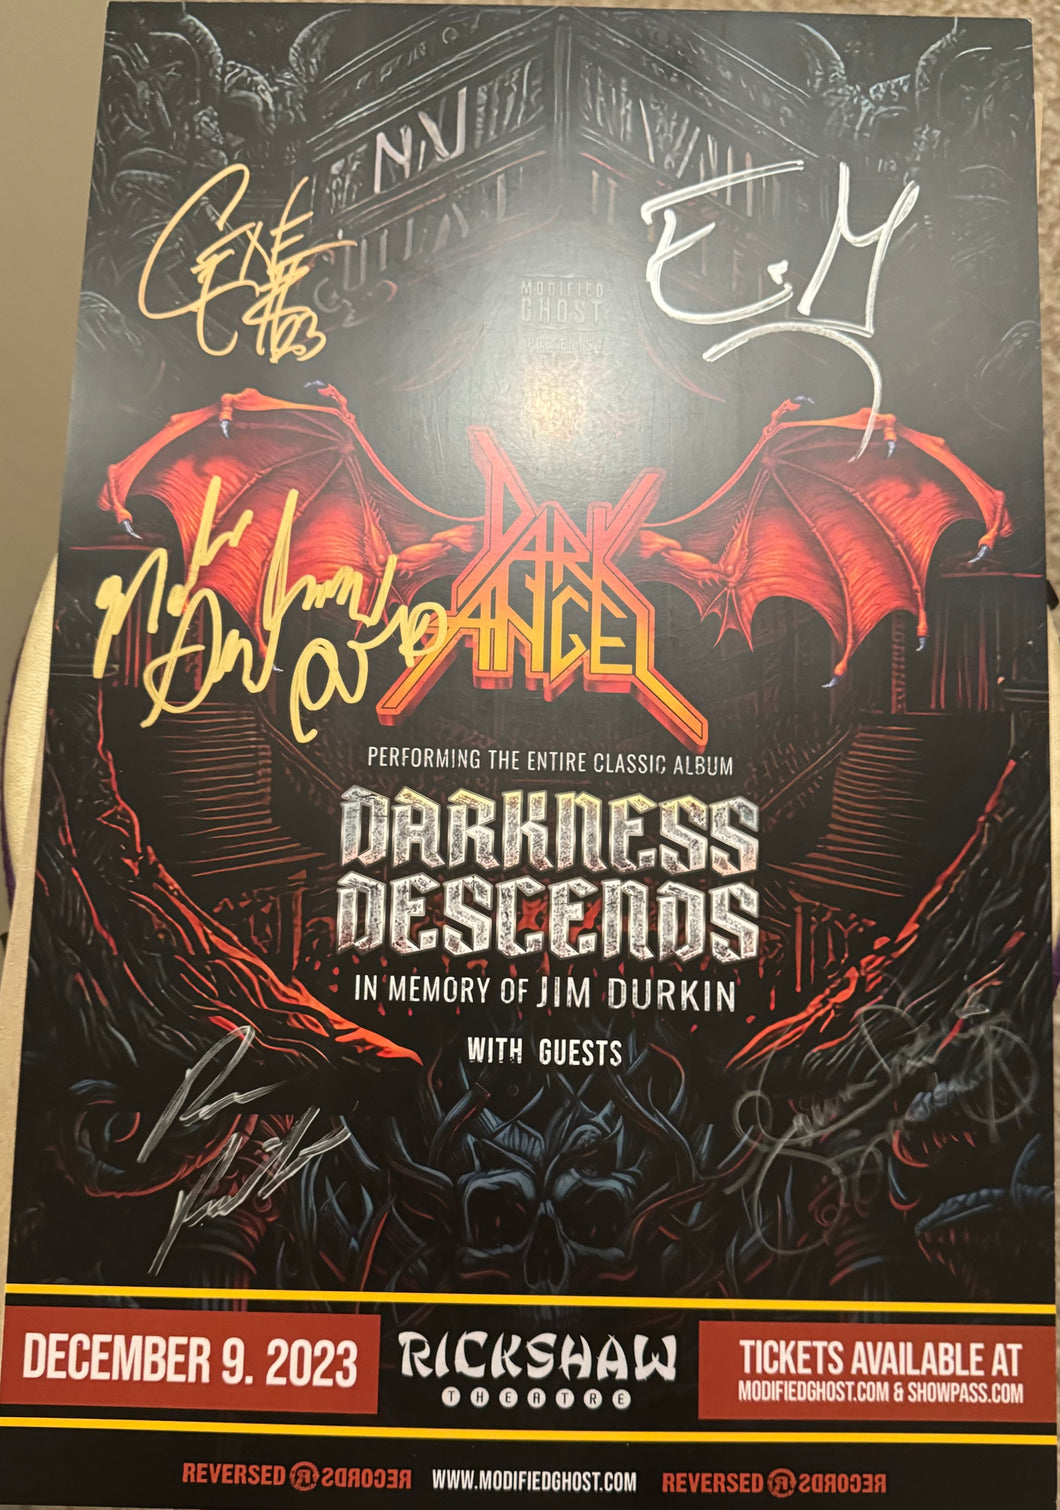 Special Edition Signed Vancouver Event Poster